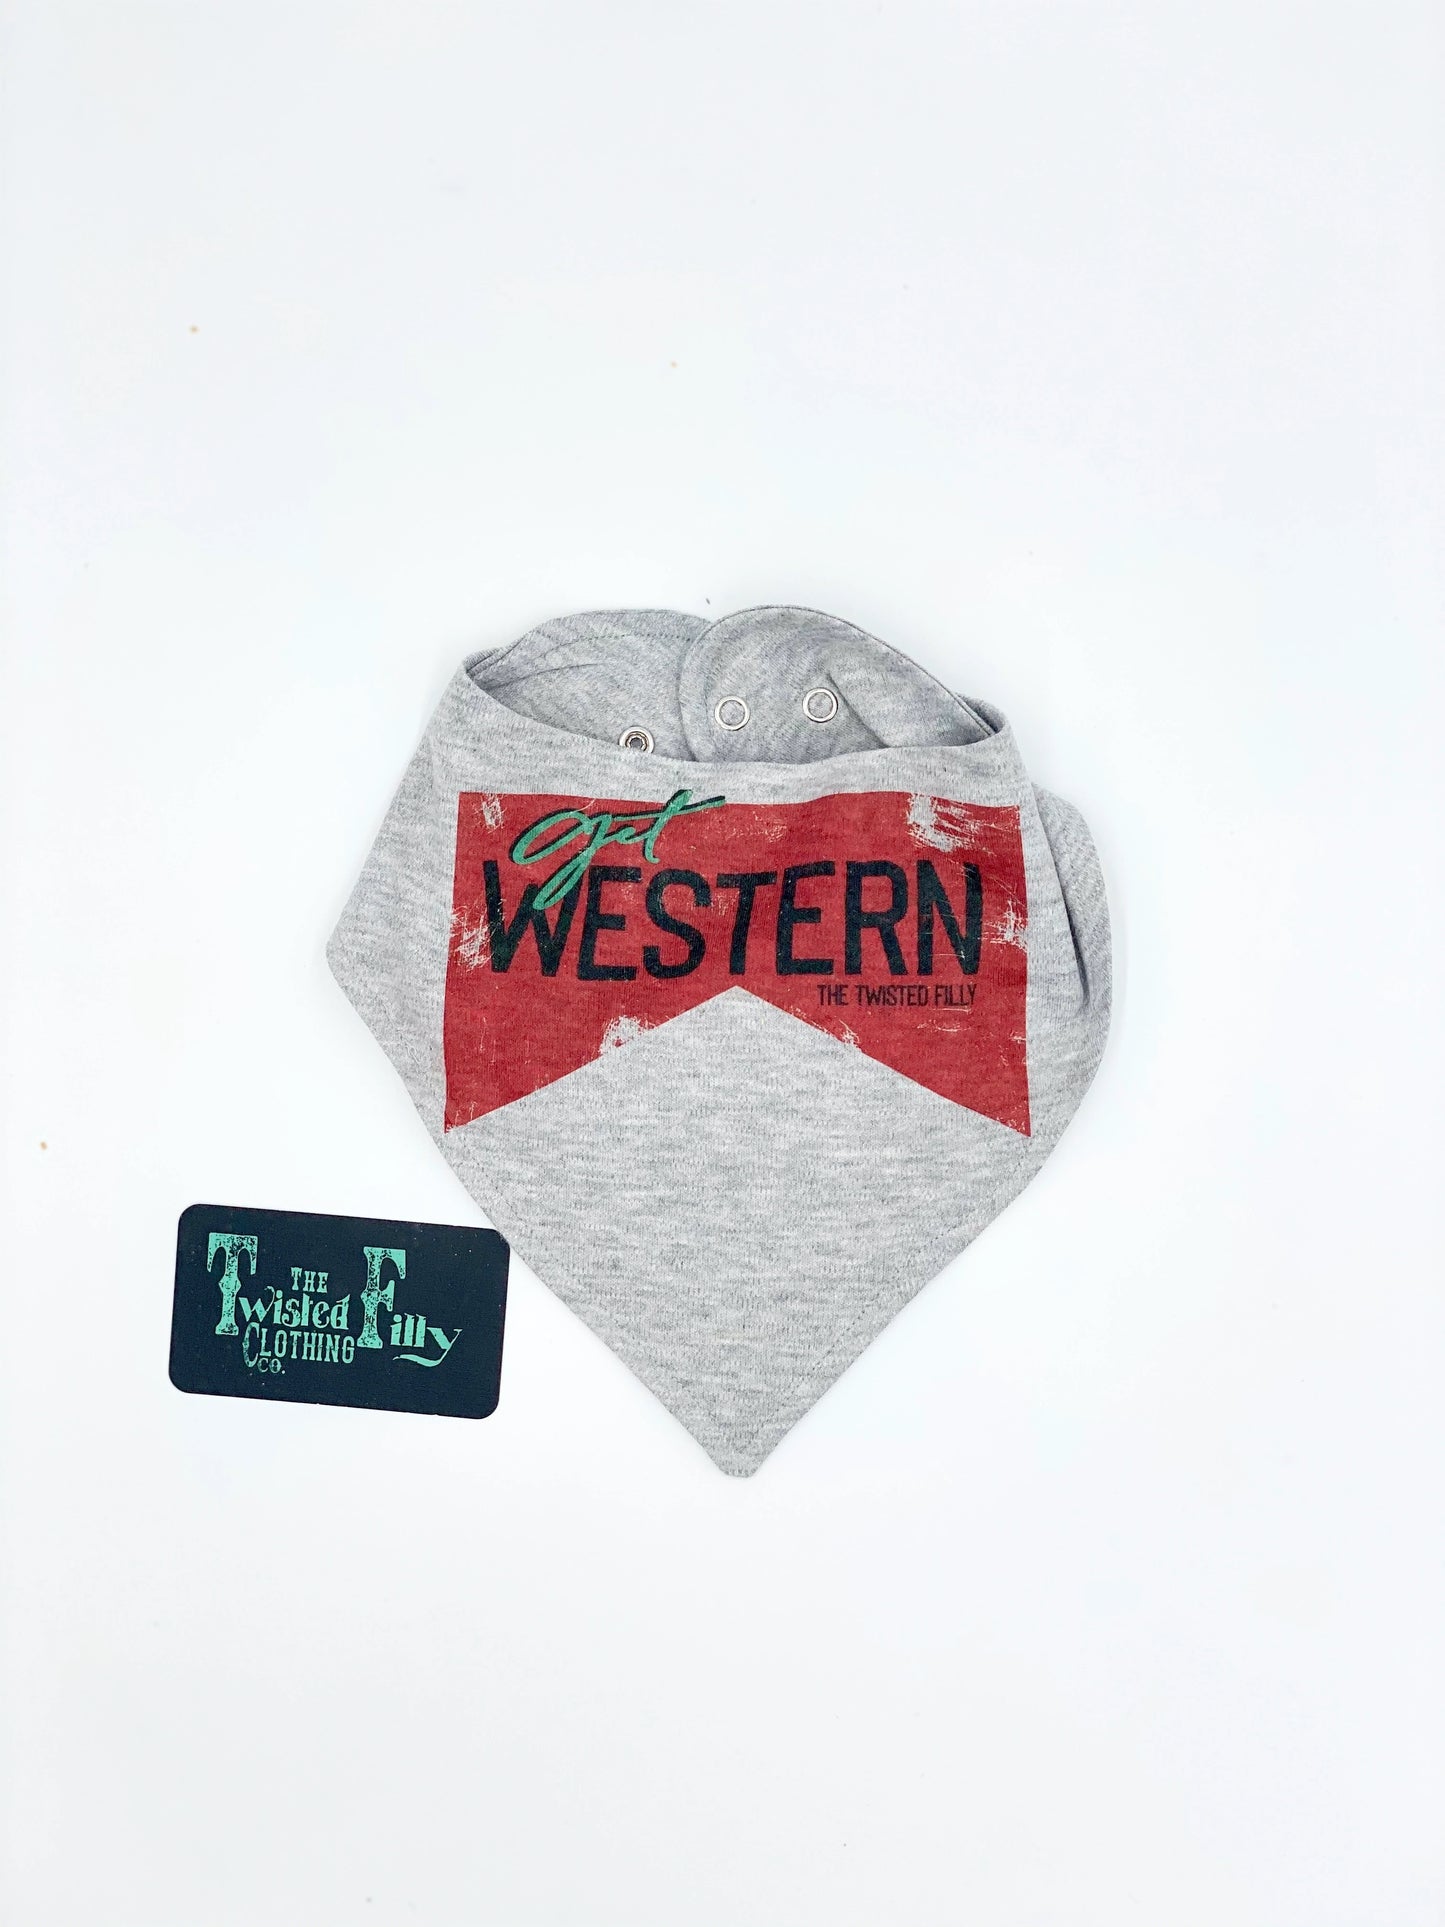 THE TWISTED FILLY CLOTHING CO. Infant Bib - Get Western